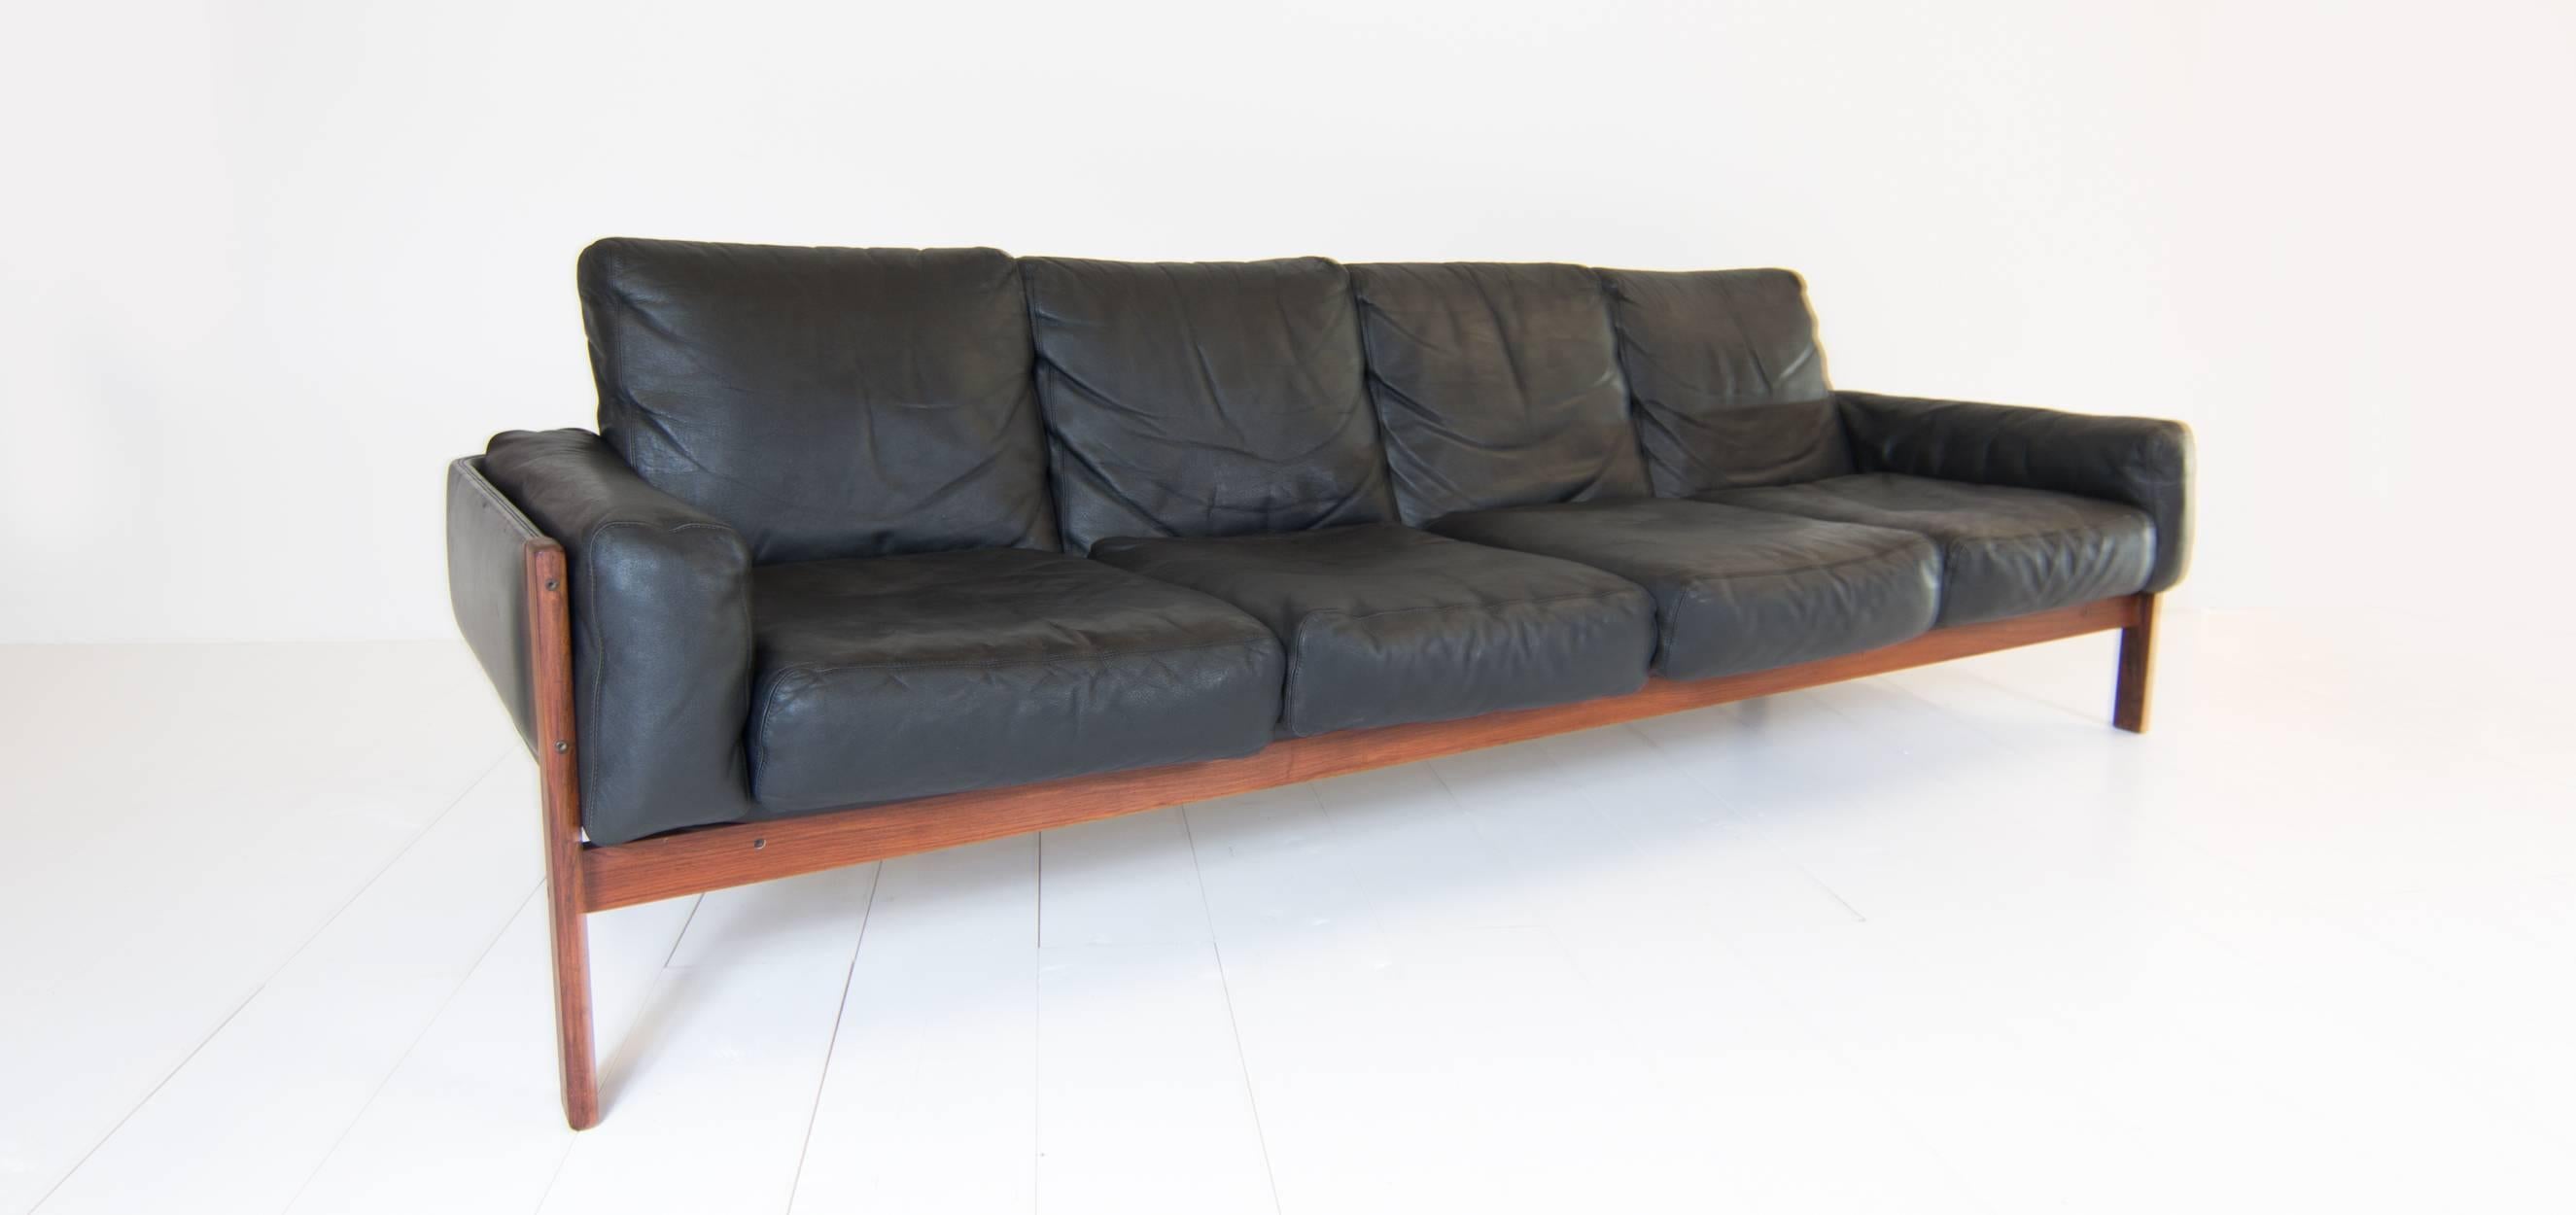 Mid-Century Modern Sven Ivar Dysthe Four-Seat Sofa with Original Black Leather Upholstery For Sale